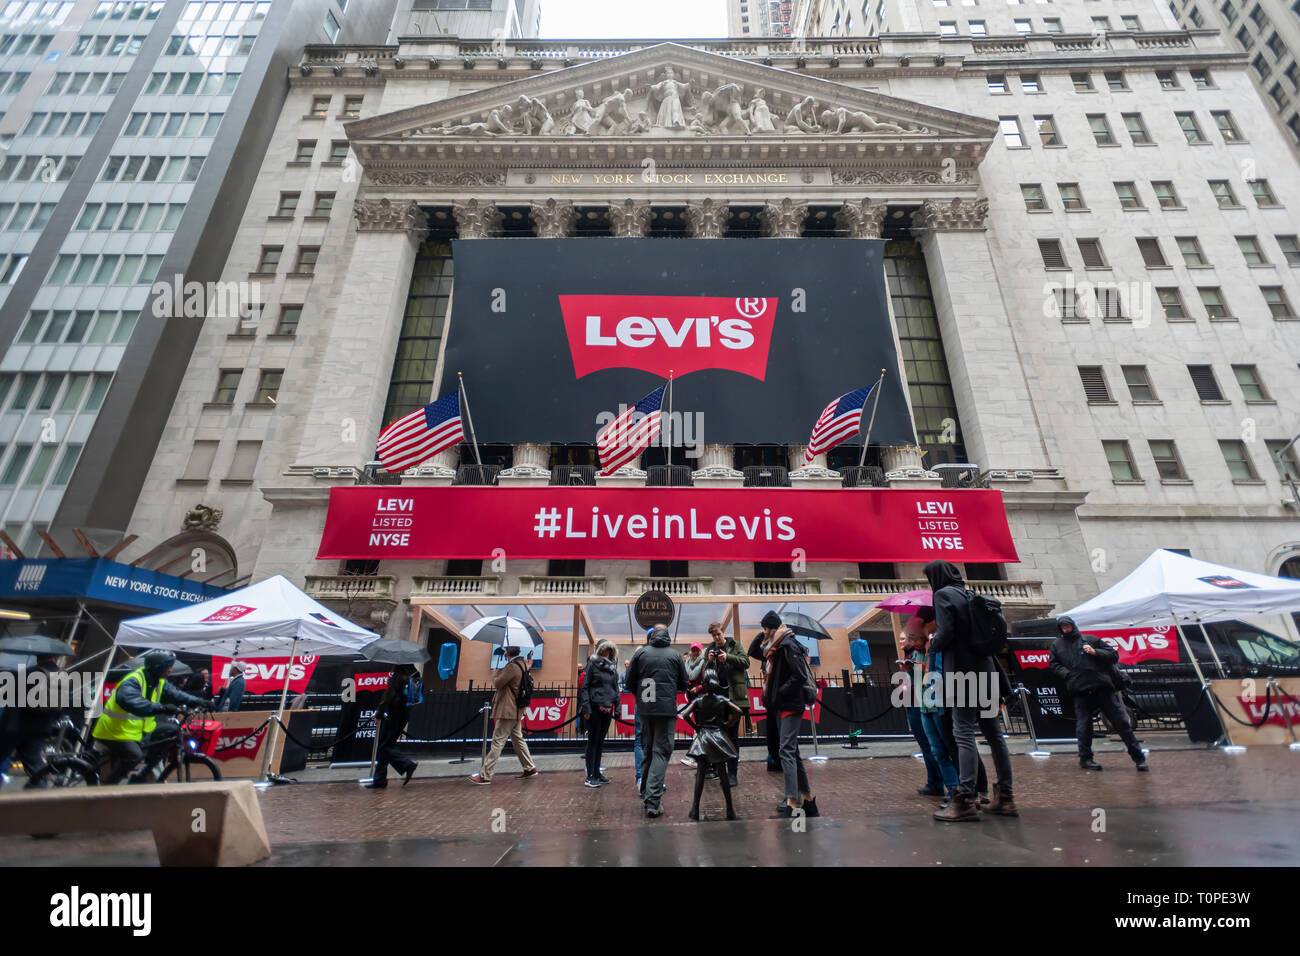 Seaside skuffet rim Lower Manhattan, New York, USA. 21st Mar 2019. The New York Stock Exchange  in Lower Manhattan is decorated for the first day of trading for the Levi  Strauss & Co. initial public